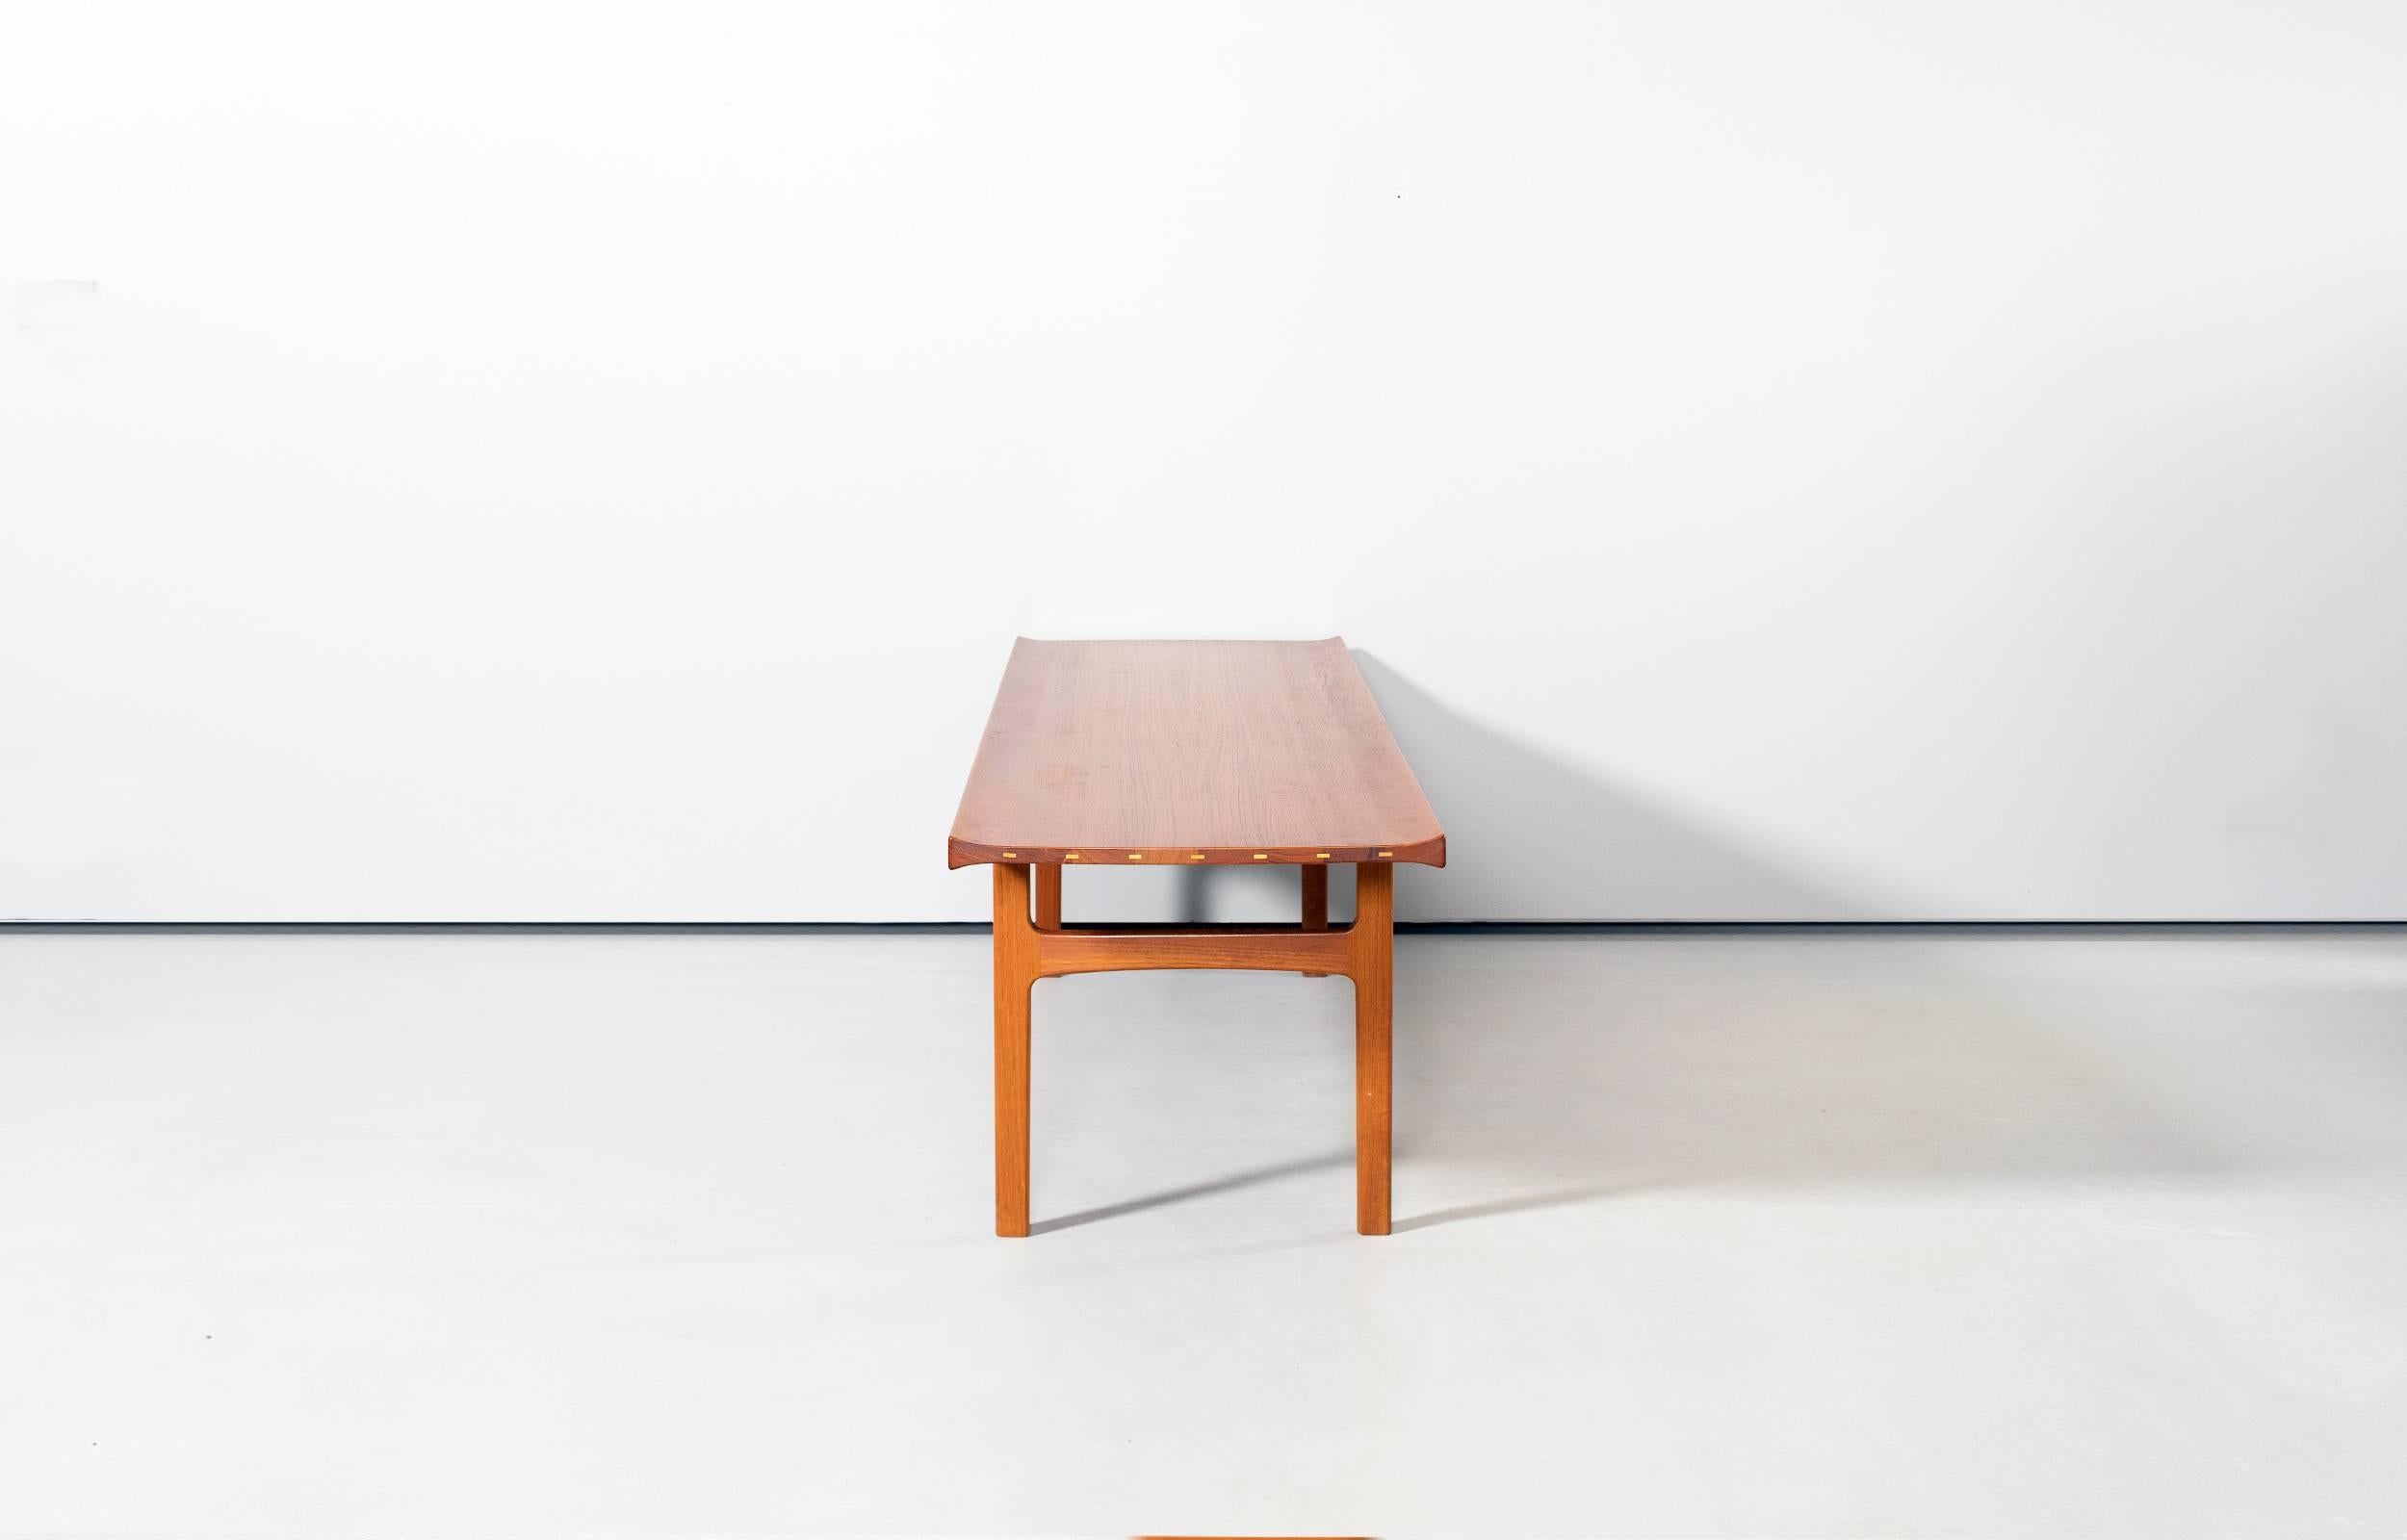 An great example of Danish craftsmanship, wonderful coffee table or bench made of solid teak with nice details. Distributed or sold at Illums Bolighus Copenhagen, Denmark in the 1960s. Made by AB Seffle Møbelfabrik. Minor wear consistent with age